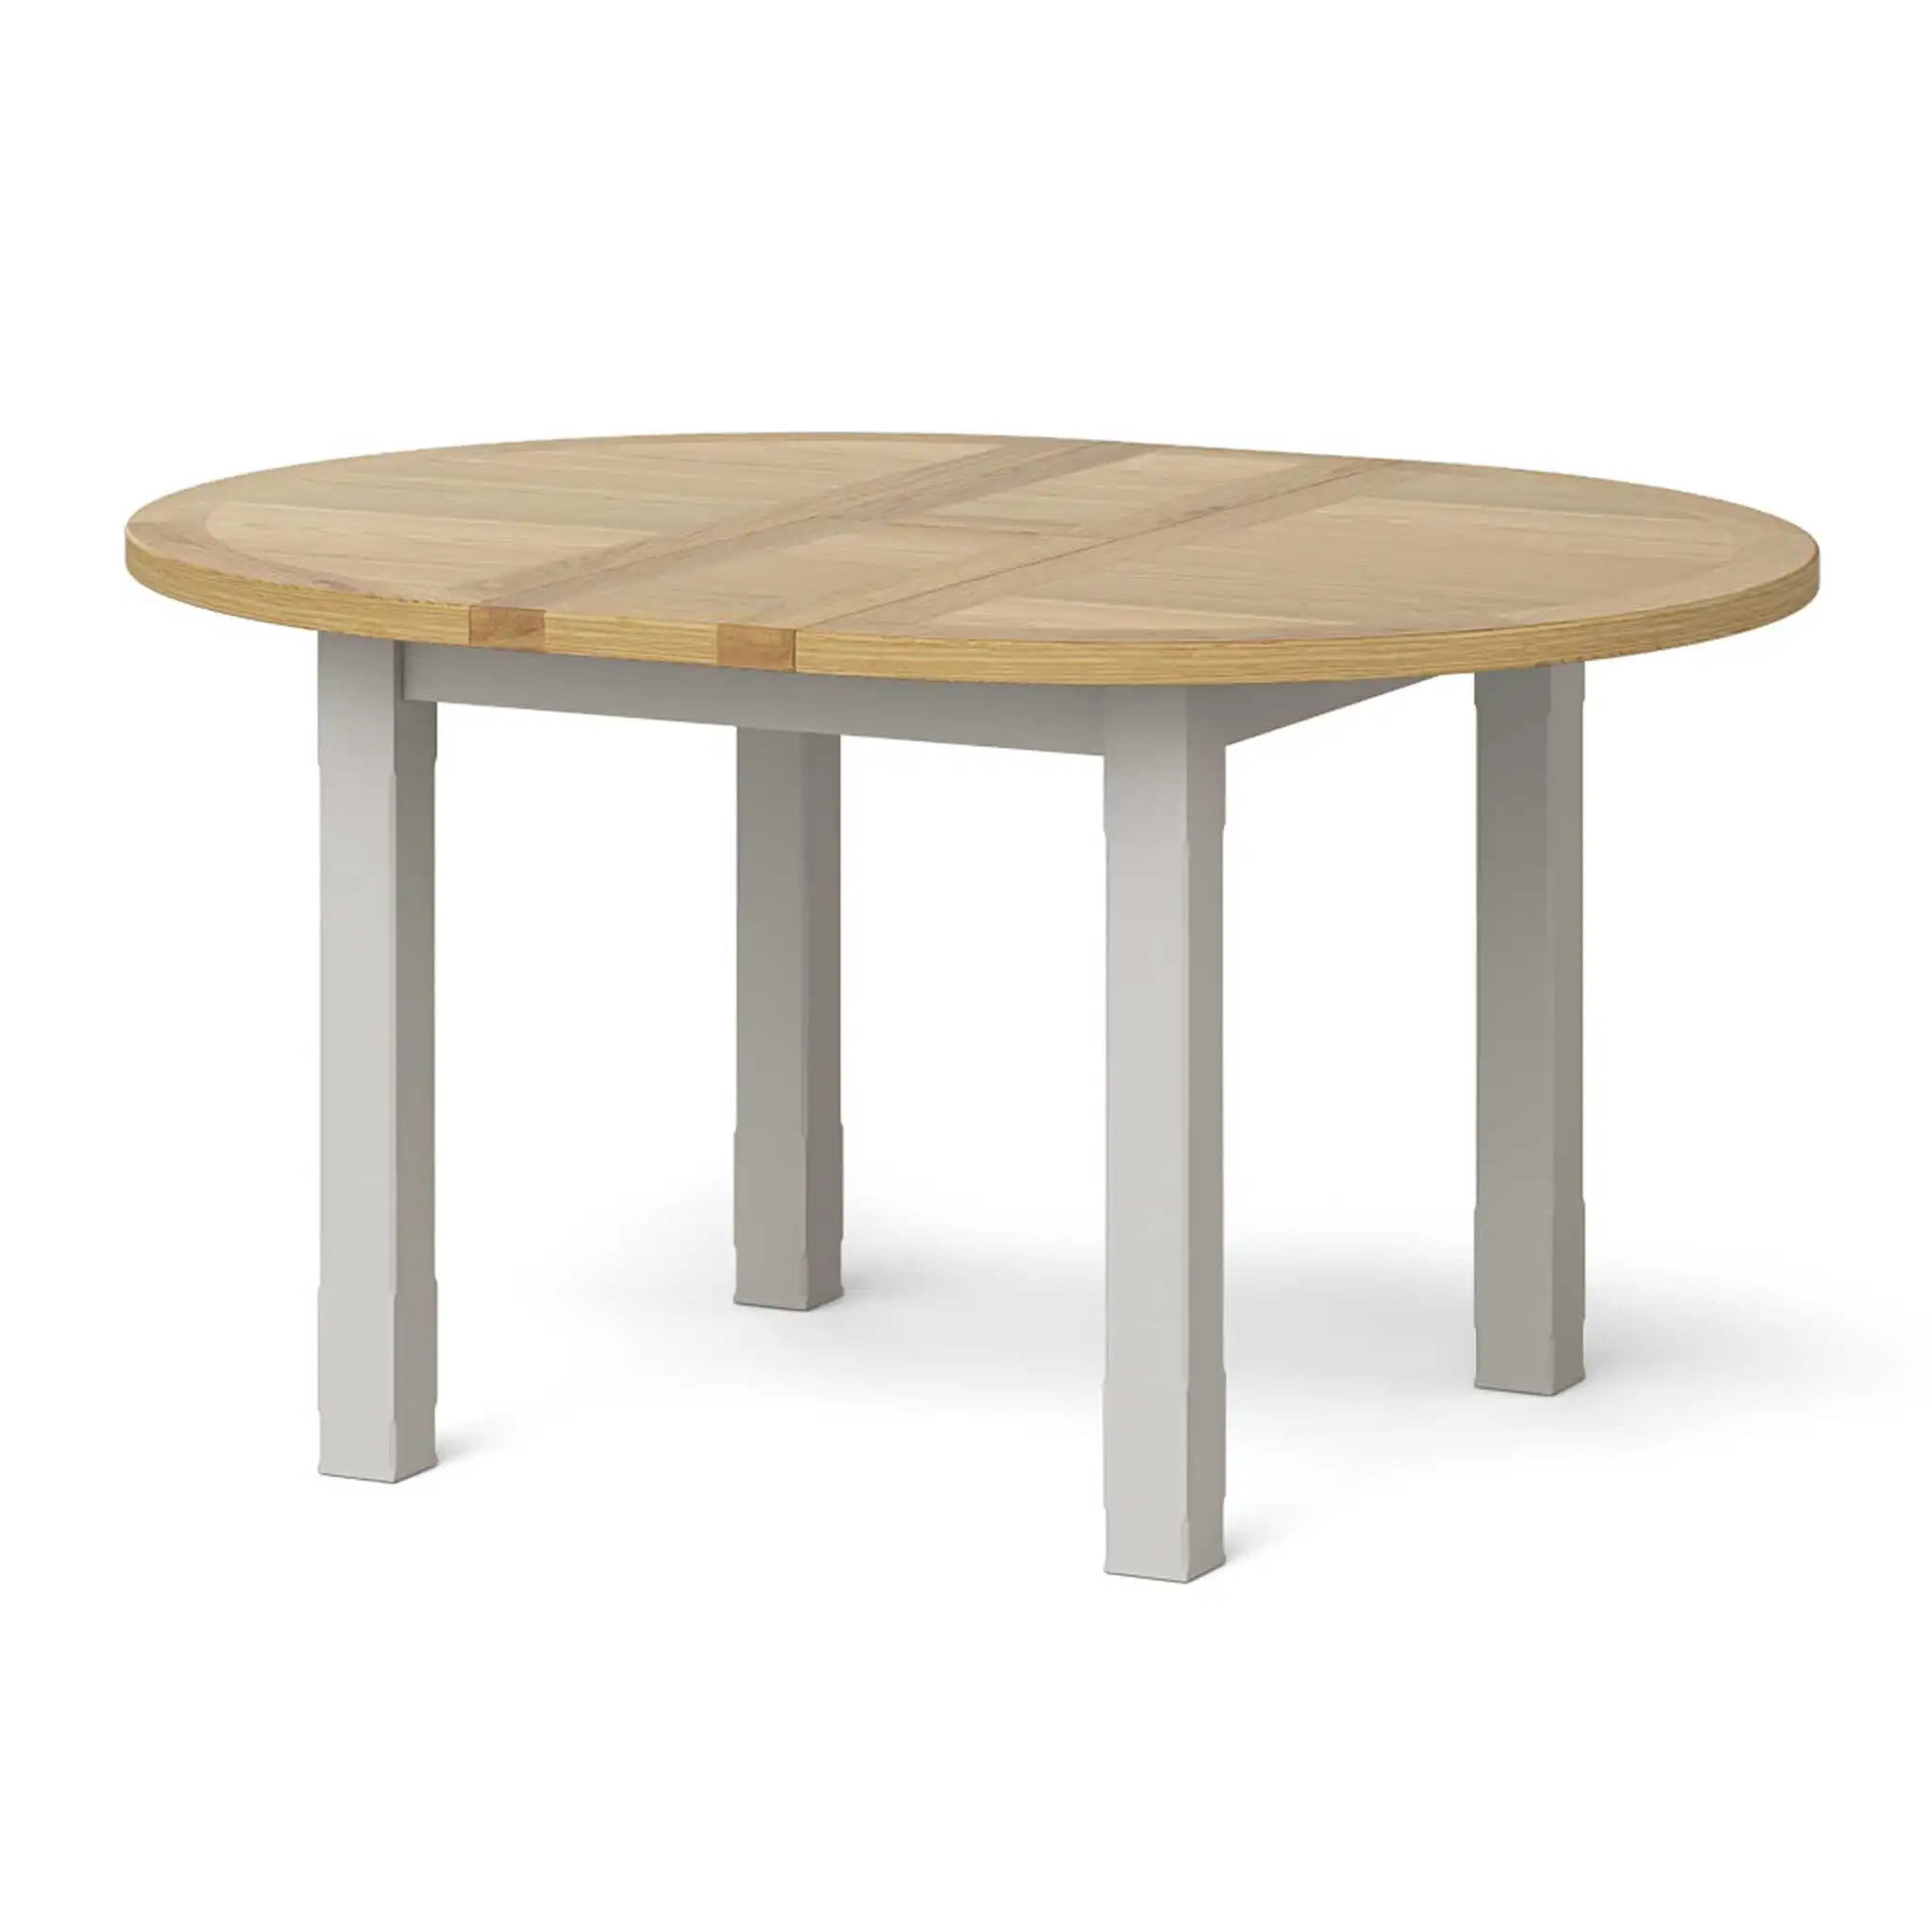 Rustic Wood Look Accent Dining room Furniture Dining Table Factory wholesale price Grey Round Extending Dining Table